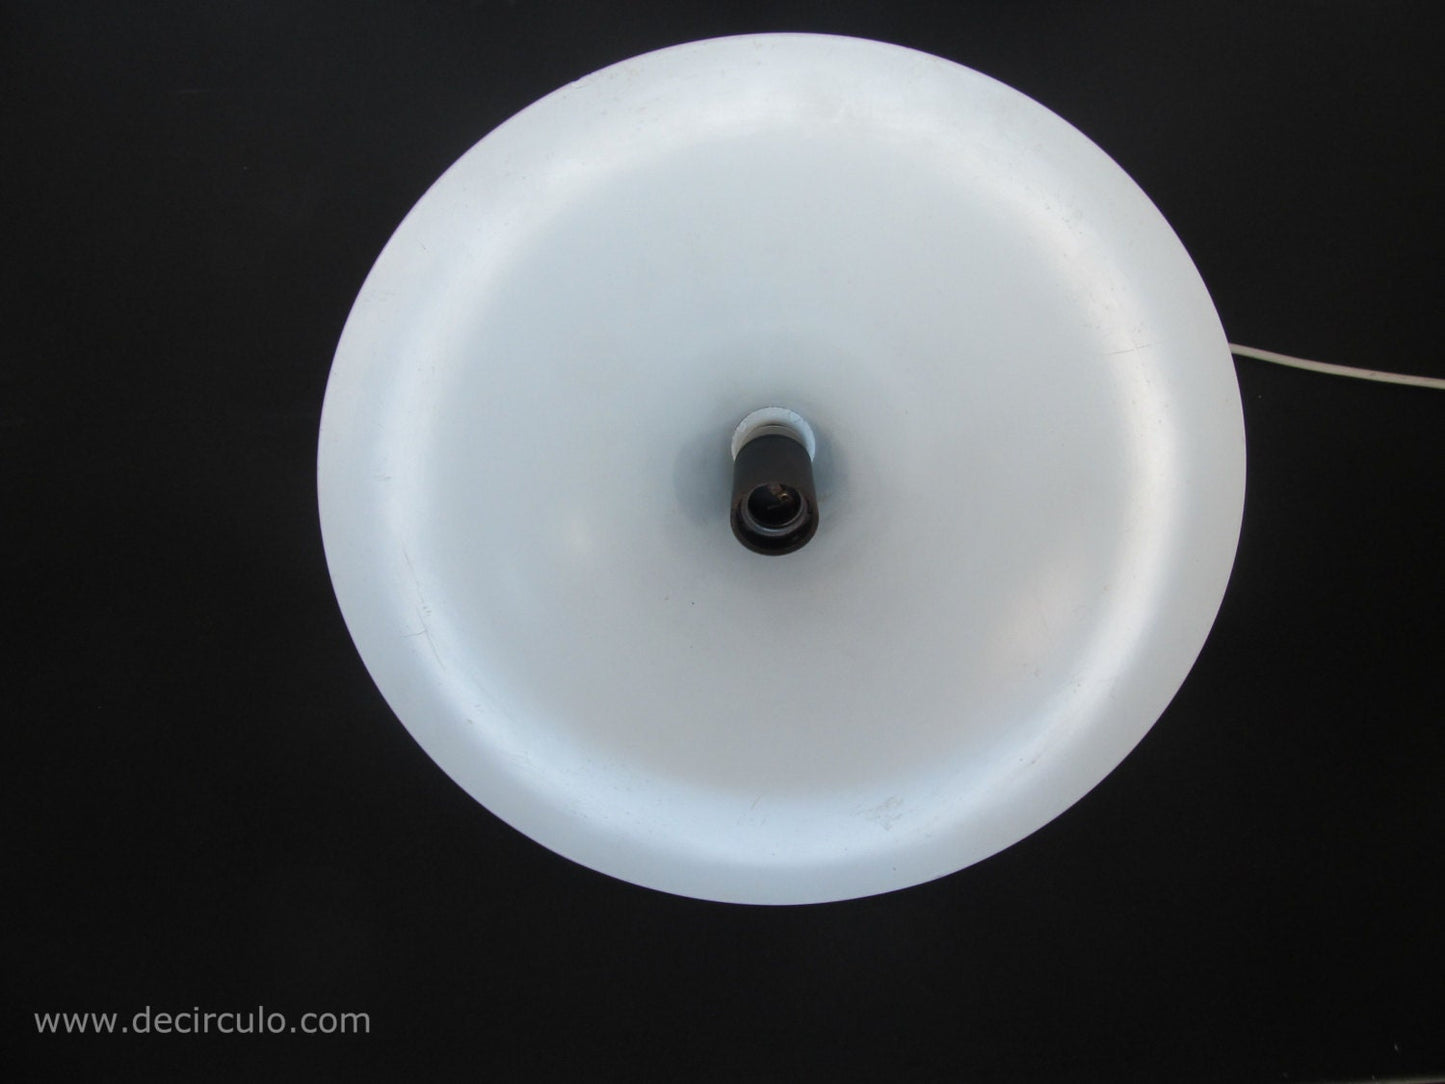 White pendant lamp, white hanging light from the 1980s small version, semi look a like